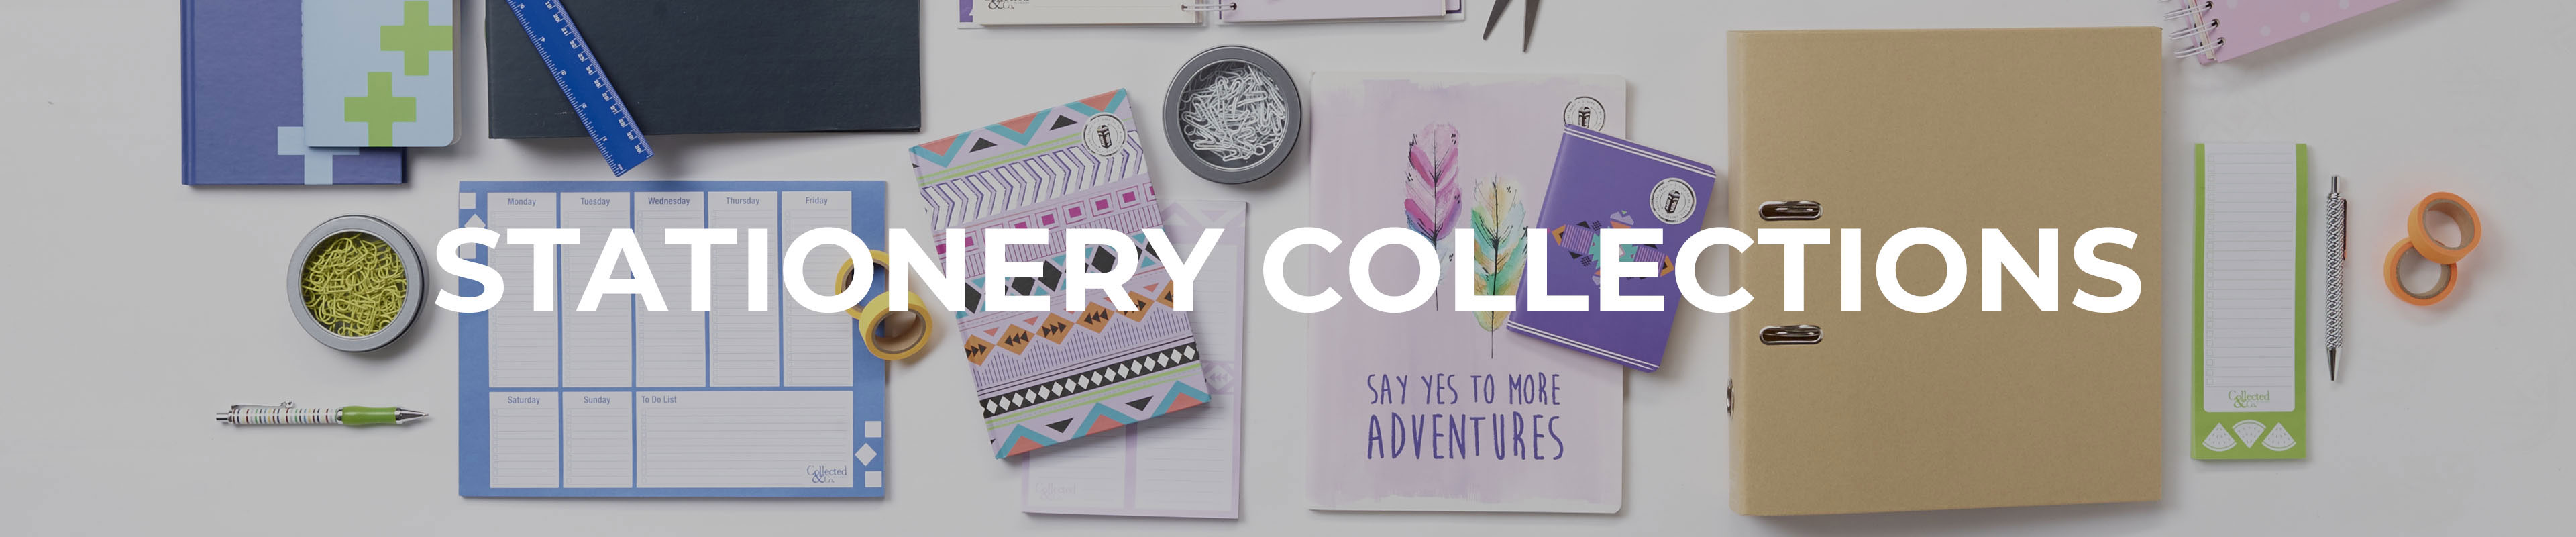 Shop Our Stationery Collections